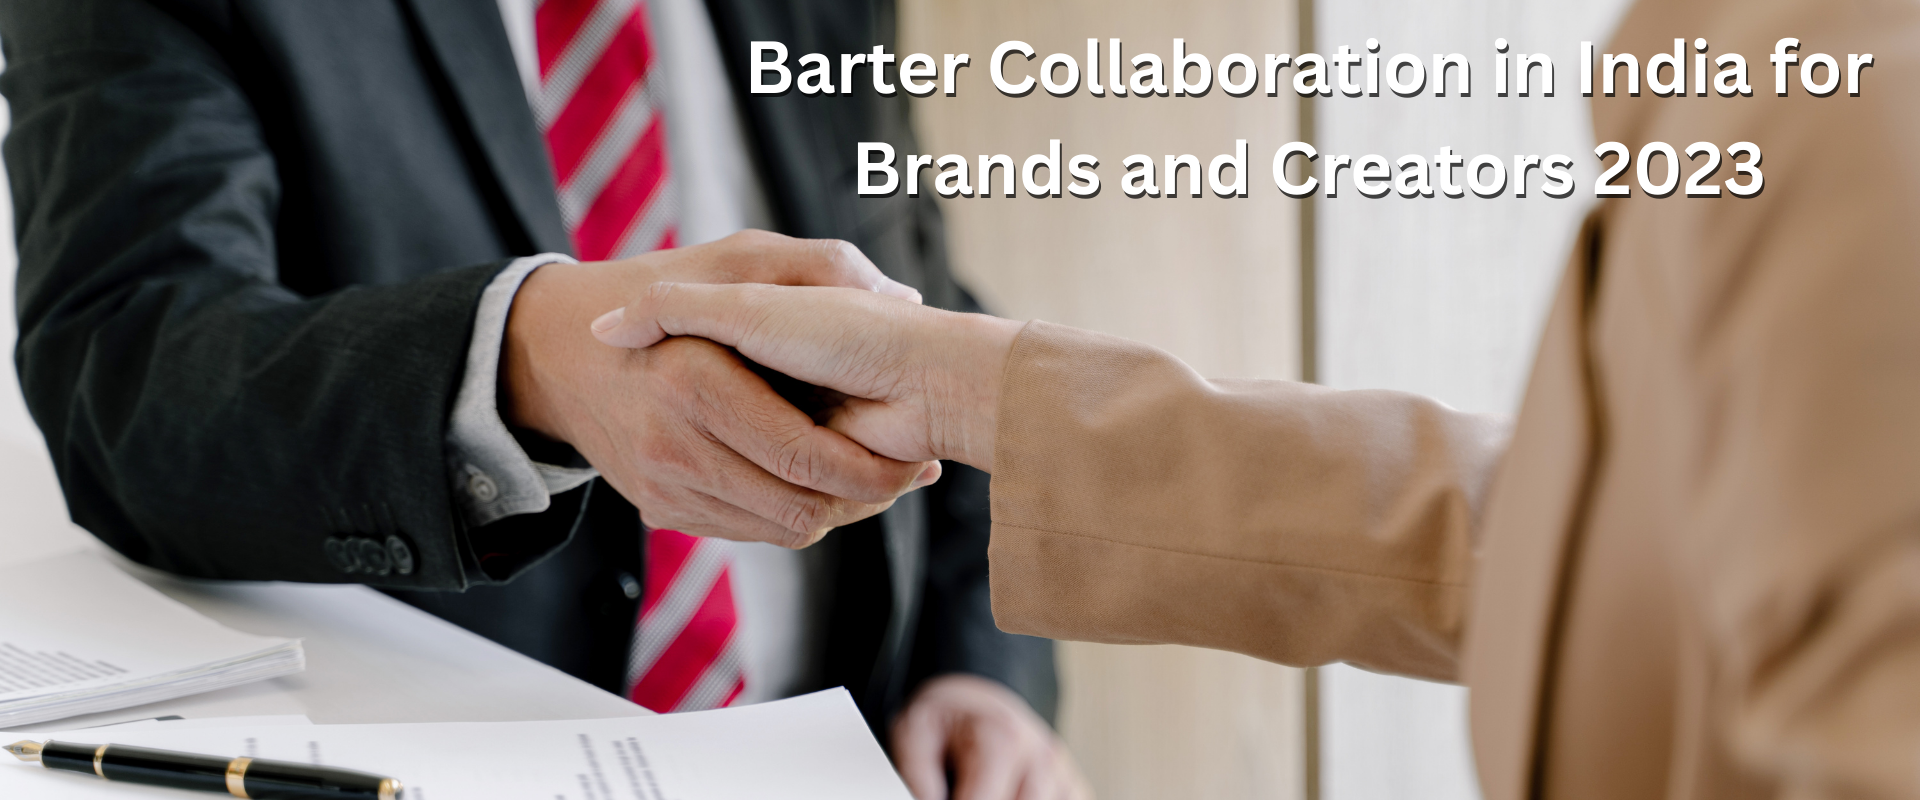 Barter Collaboration in India for Brands and Creators 2023